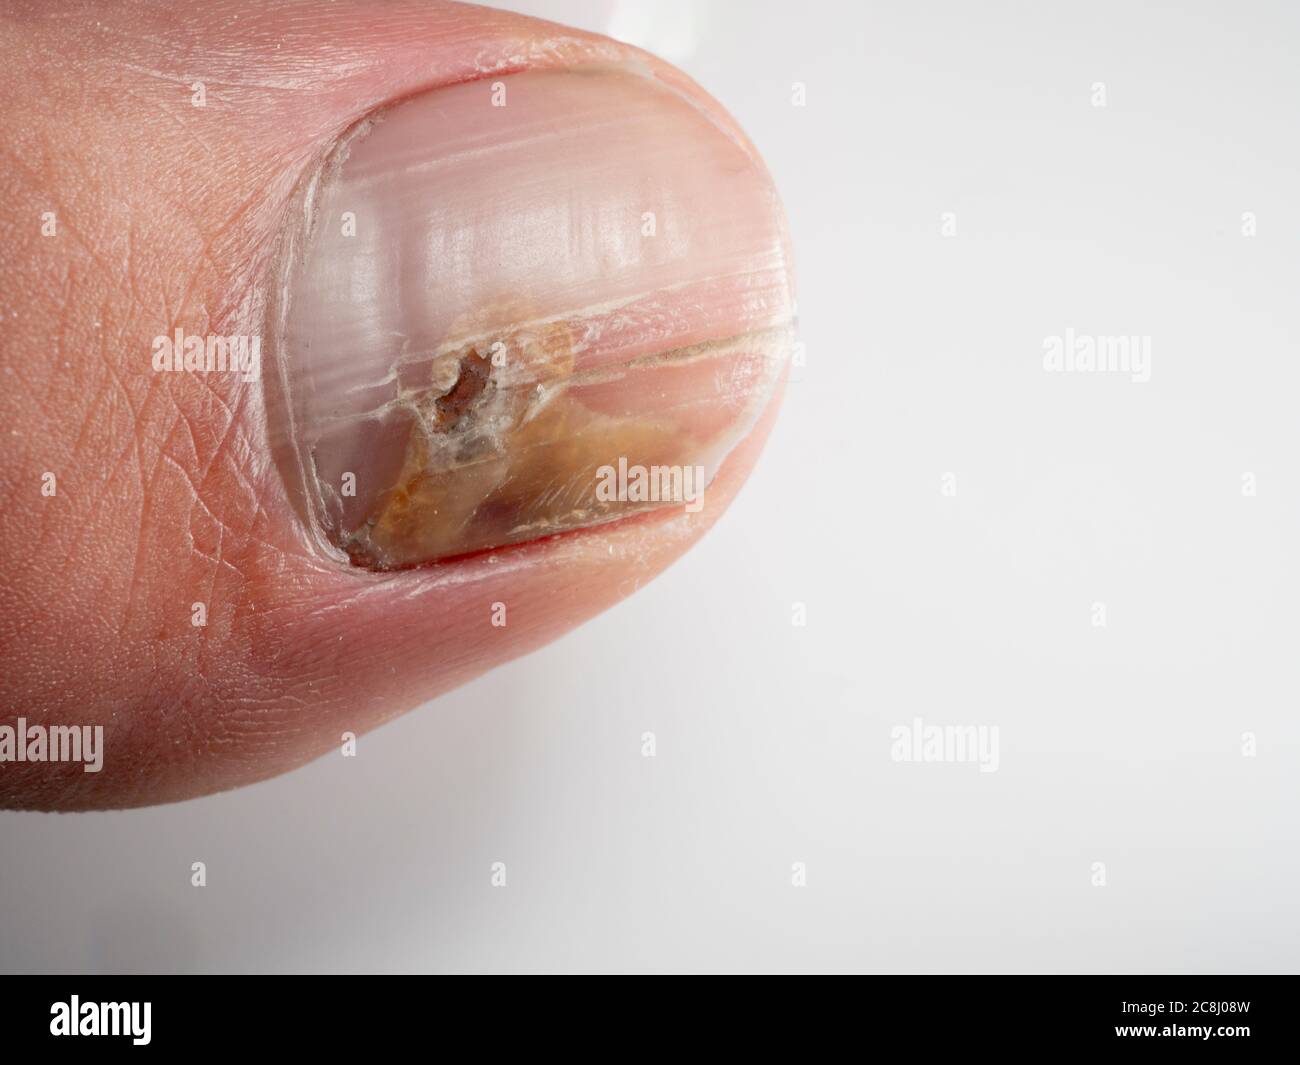 Nail infections caused by fungi such as: onychomycosis also known